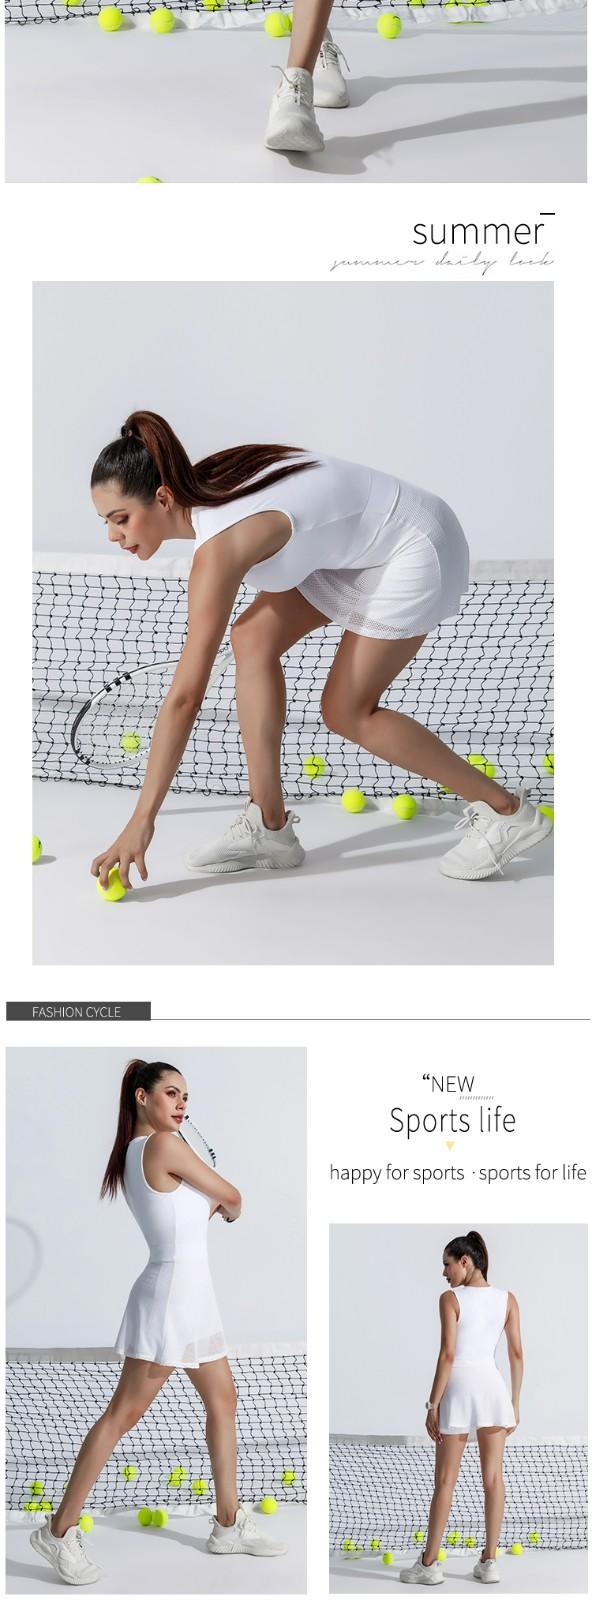 fashion woman tennis clothes experts for yoga